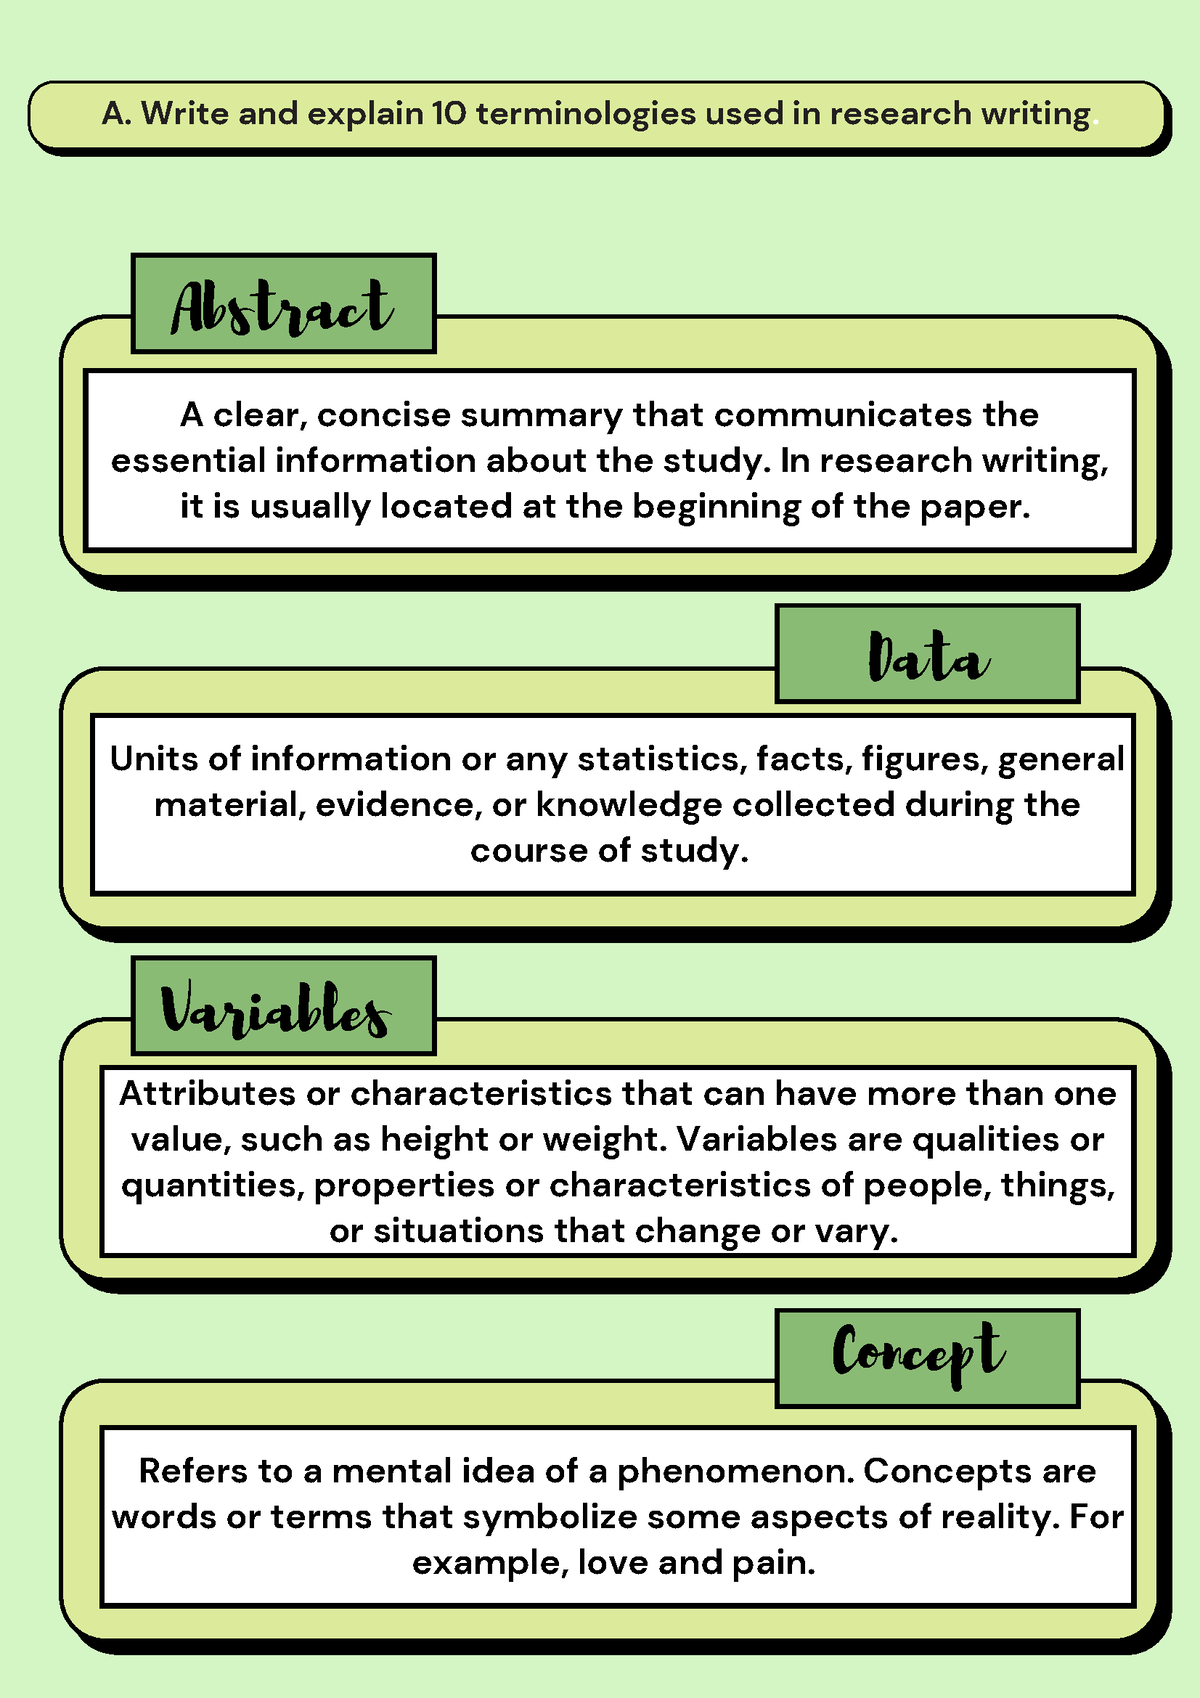 English 10 Terminologies used in Research Writing - A. Write and ...